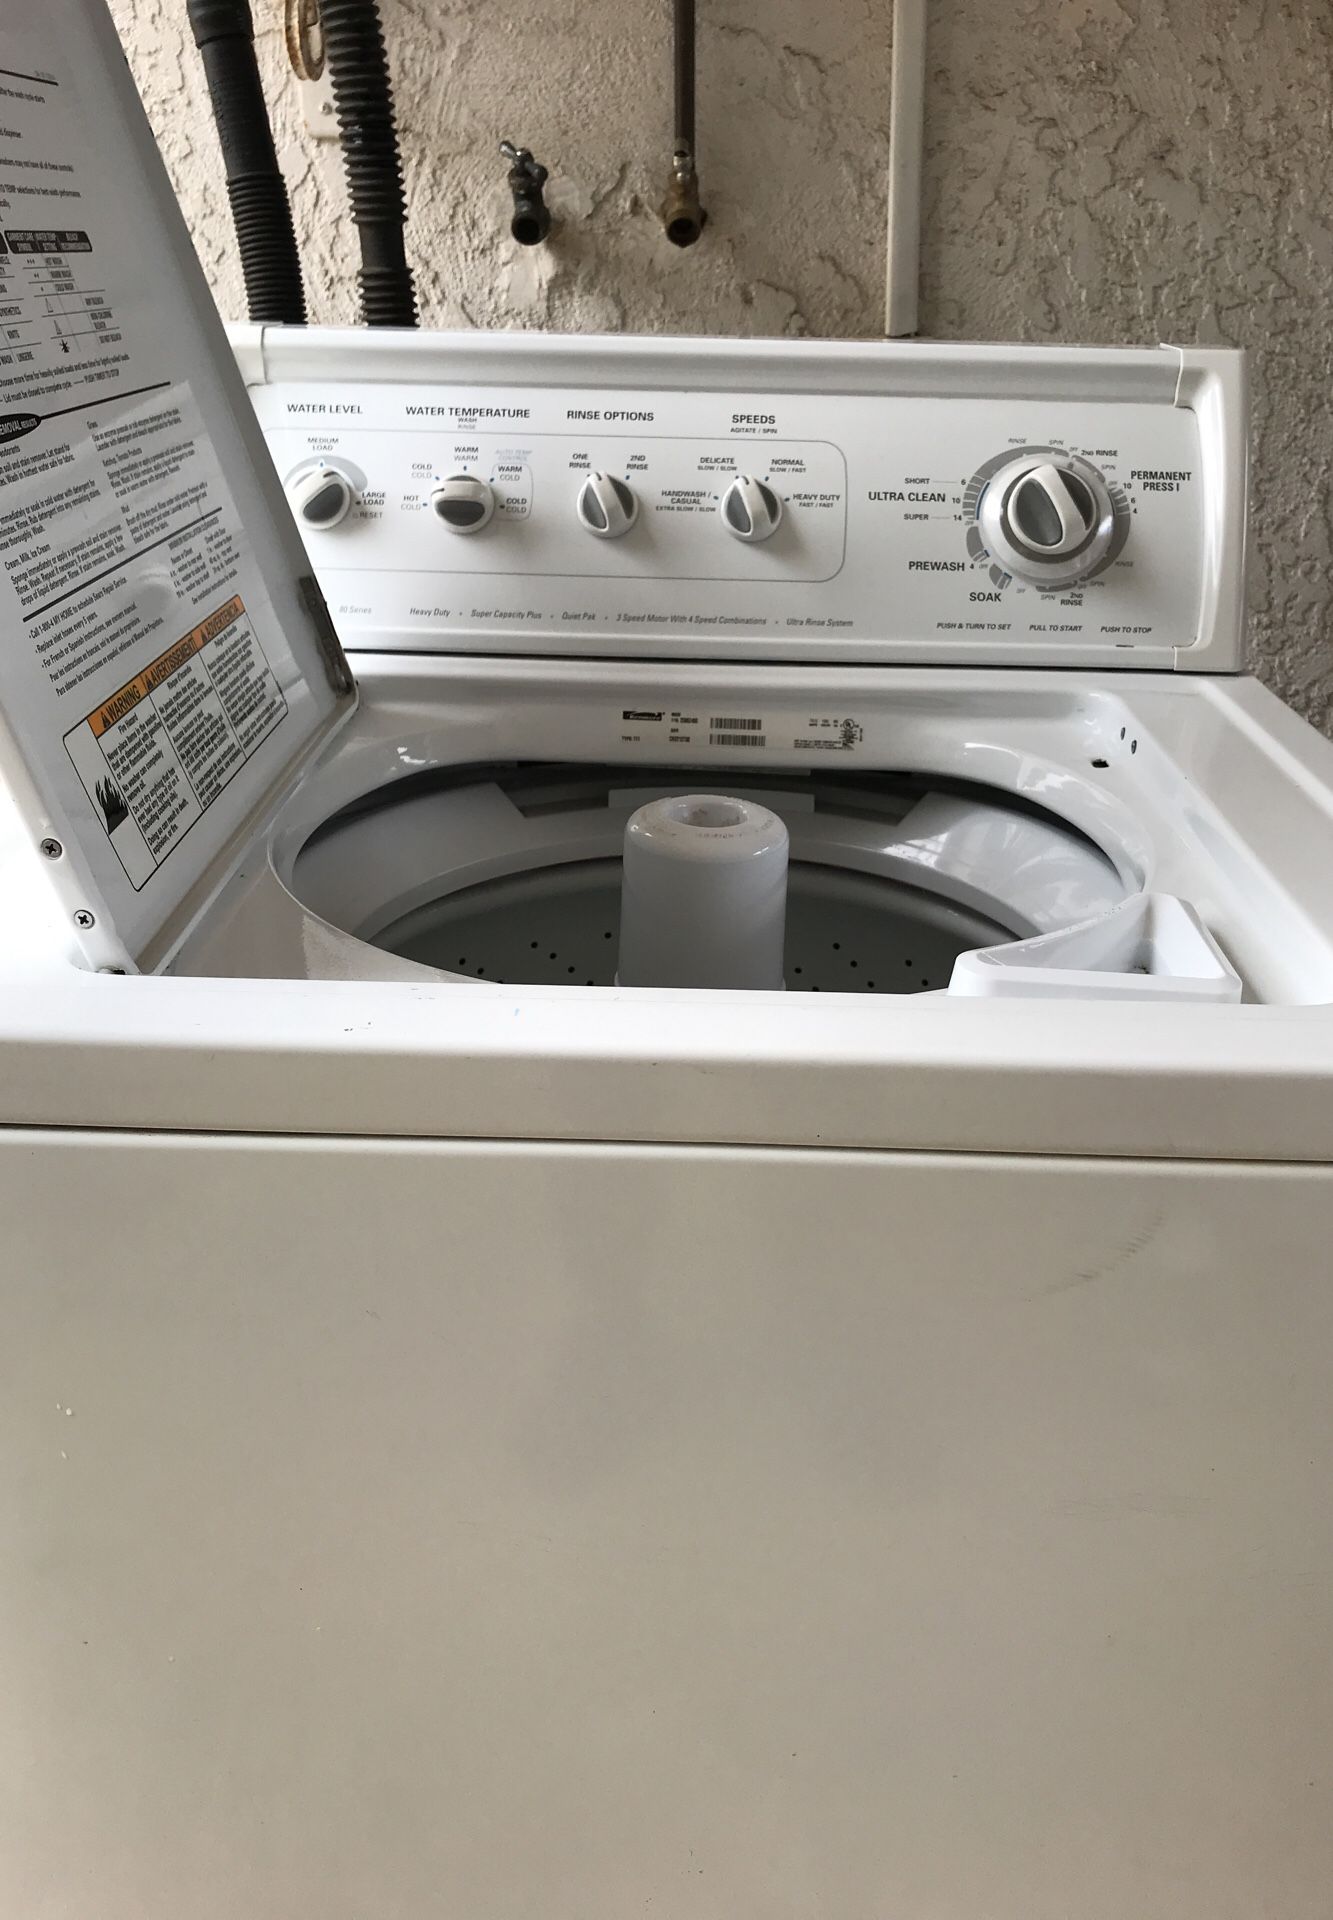 Brand used Kenmore washer.